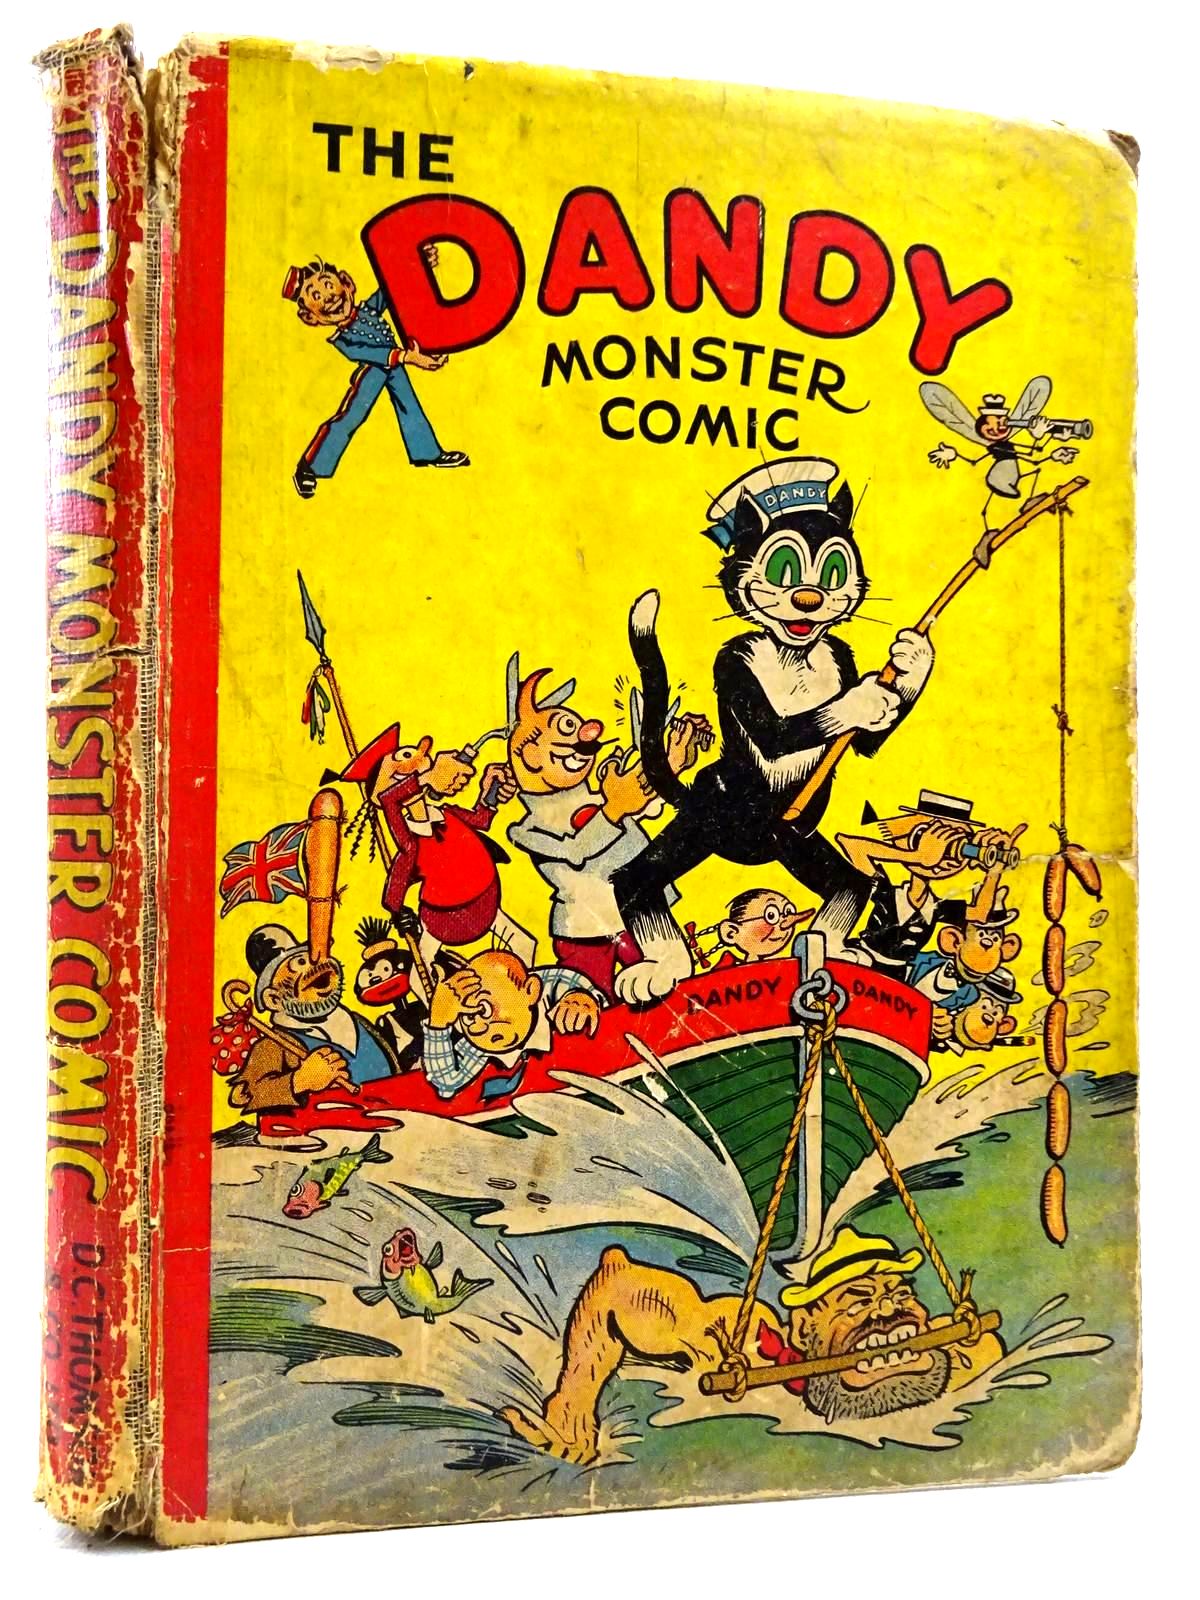 Photo of THE DANDY MONSTER COMIC 1942 published by D.C. Thomson & Co Ltd. (STOCK CODE: 2129020)  for sale by Stella & Rose's Books